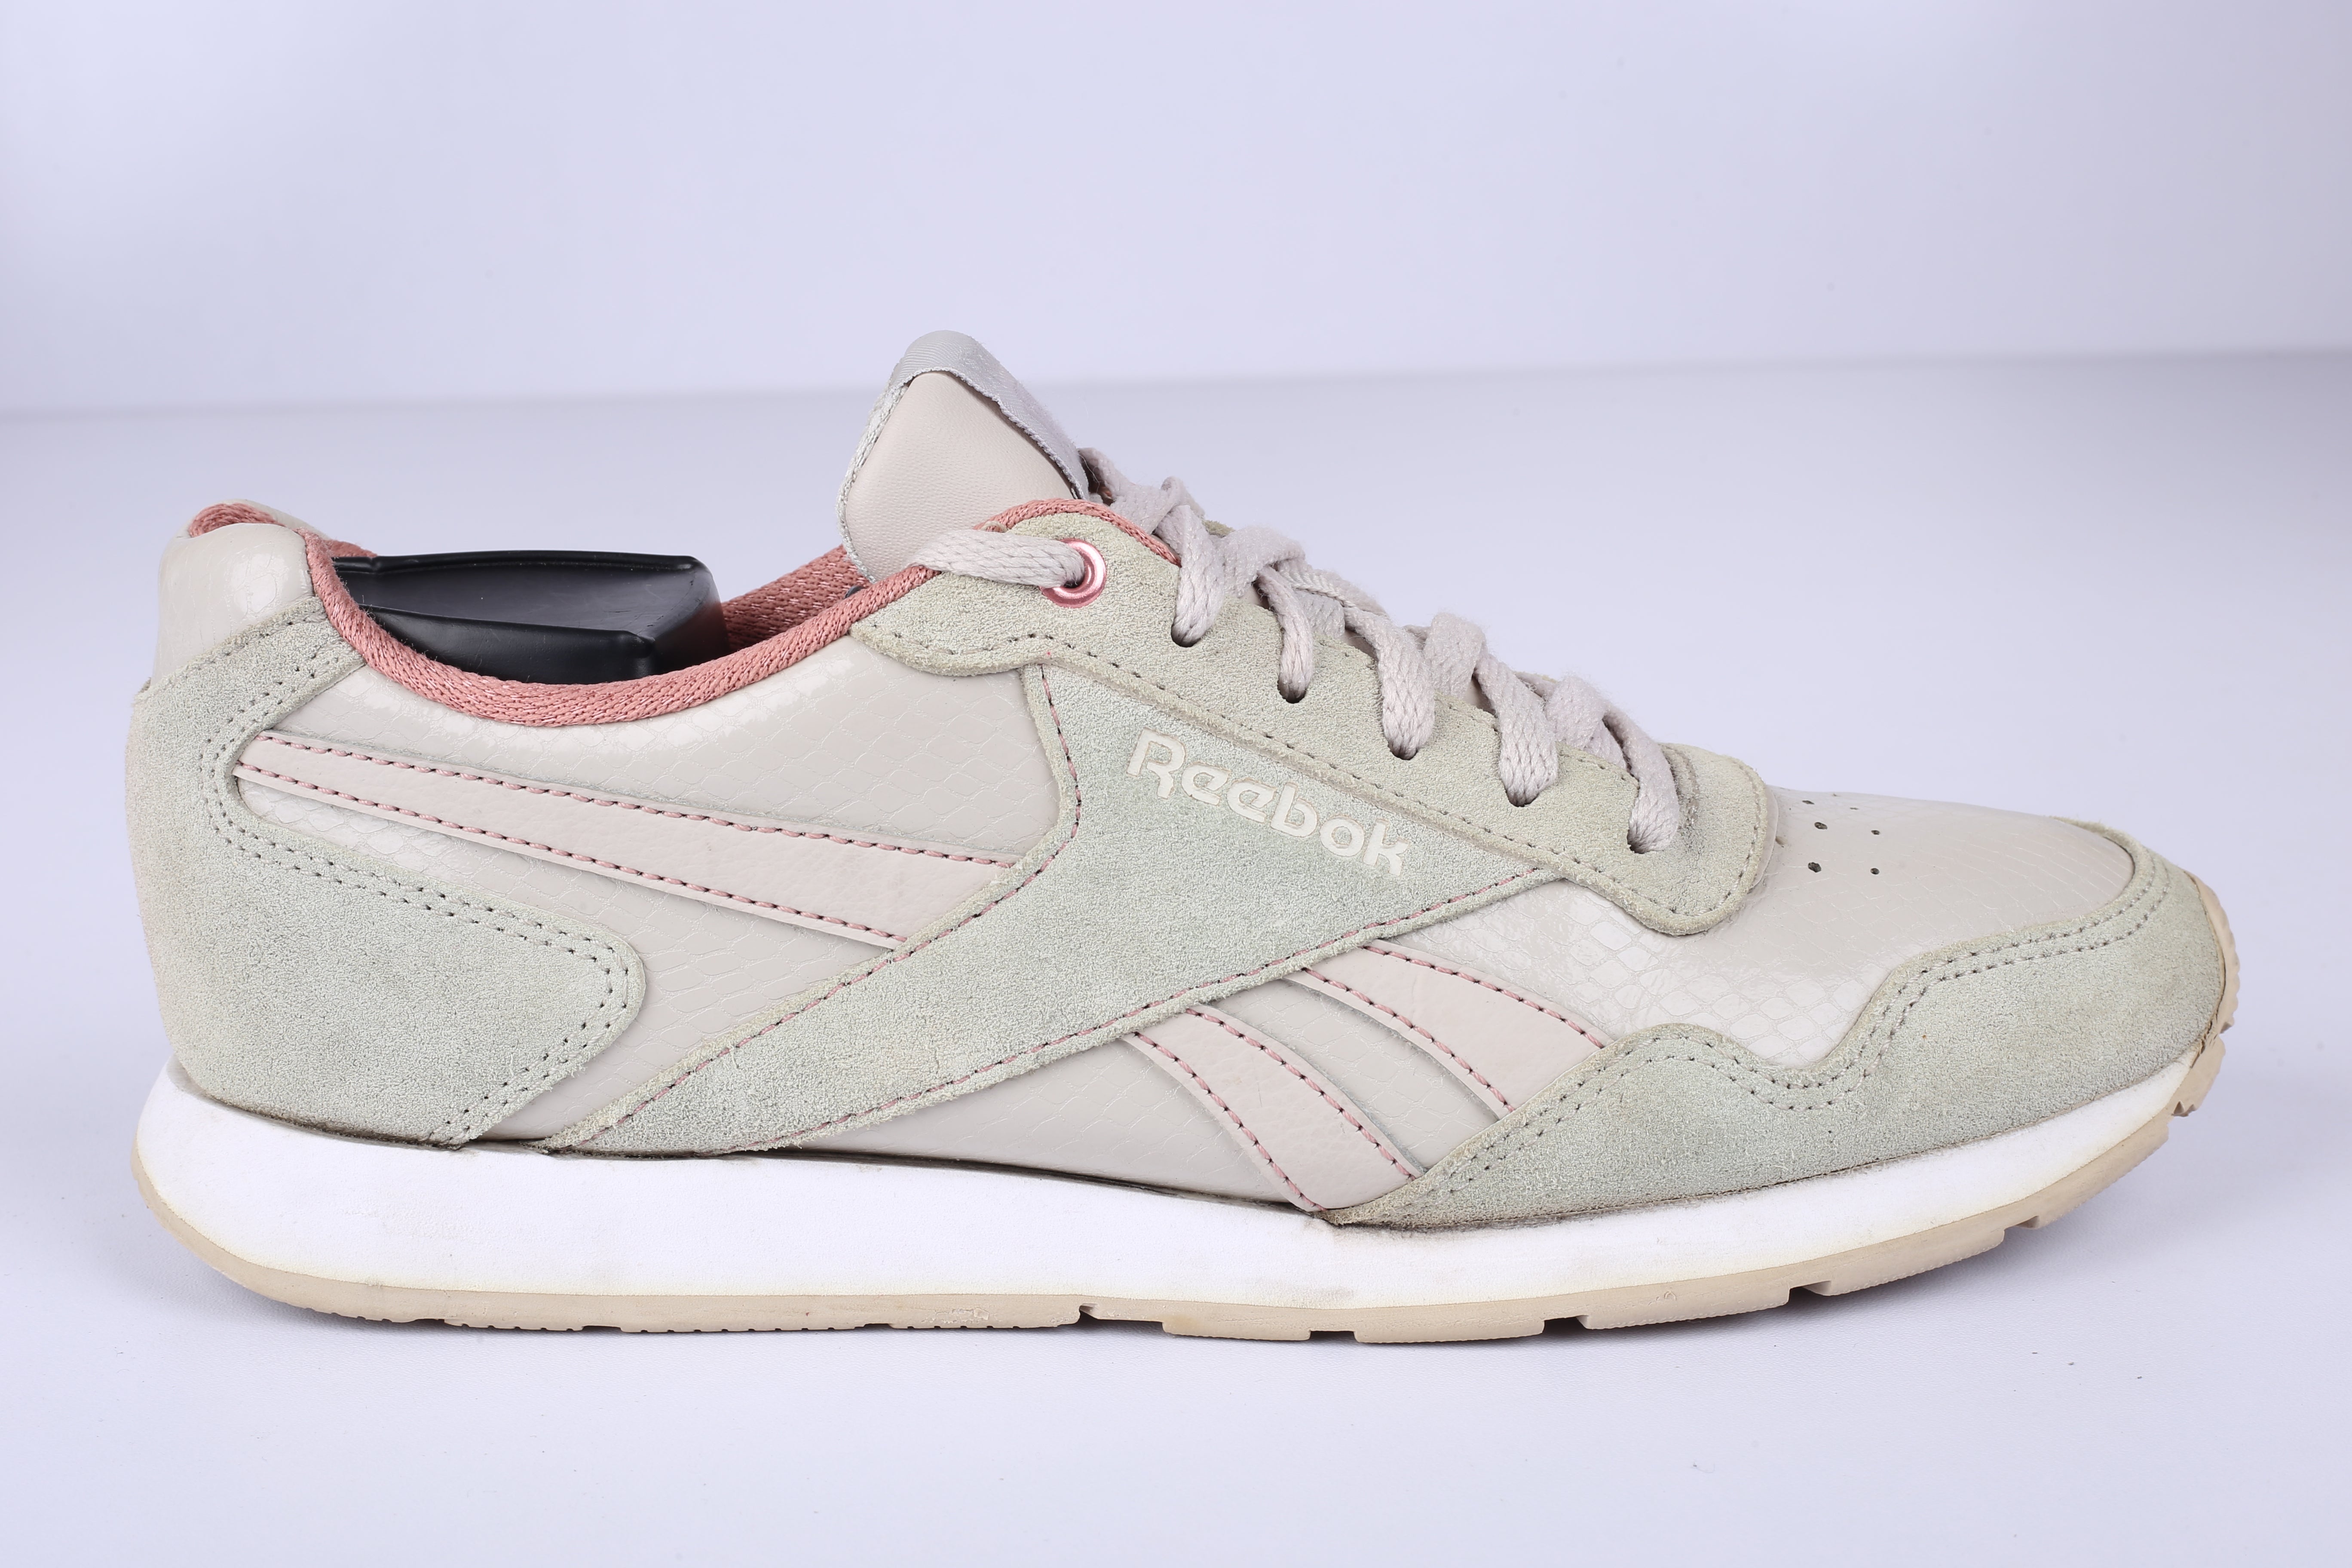 Reebok Royal Guide Sneaker - (Condition Excellent)